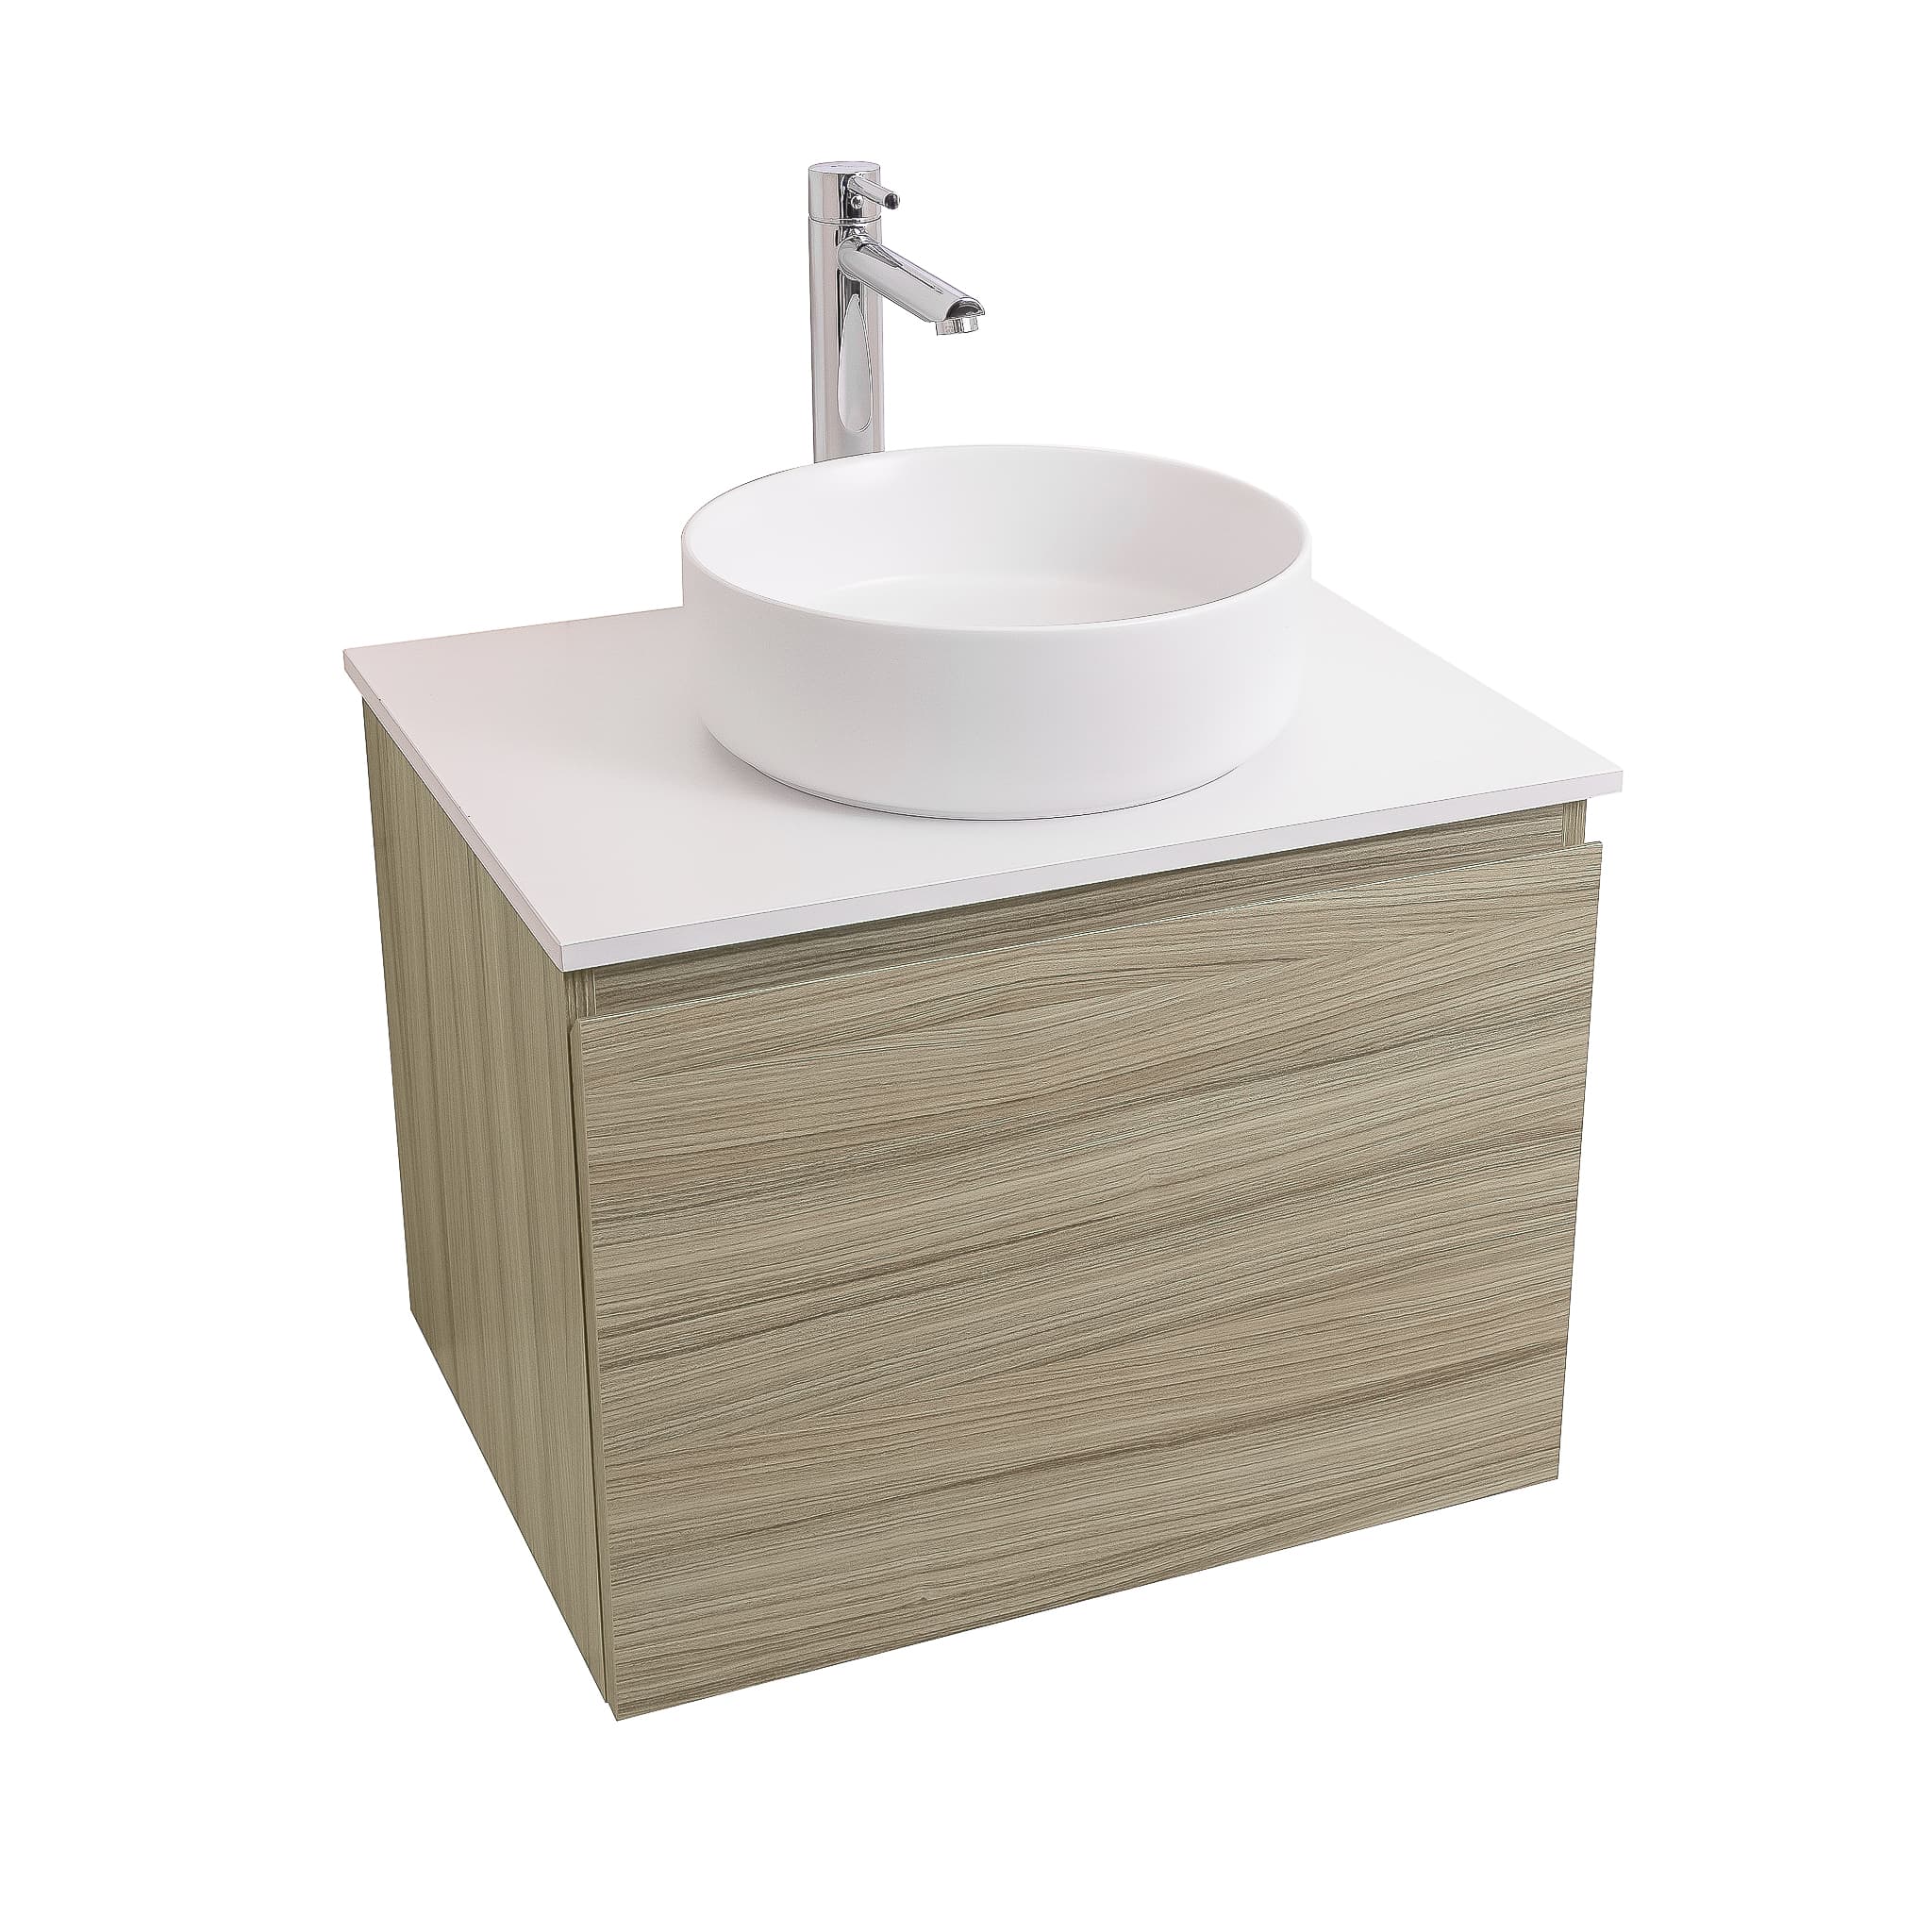 Venice 23.5 Nilo Grey Wood Texture Cabinet, Ares White Top And Ares White Ceramic Basin, Wall Mounted Modern Vanity Set